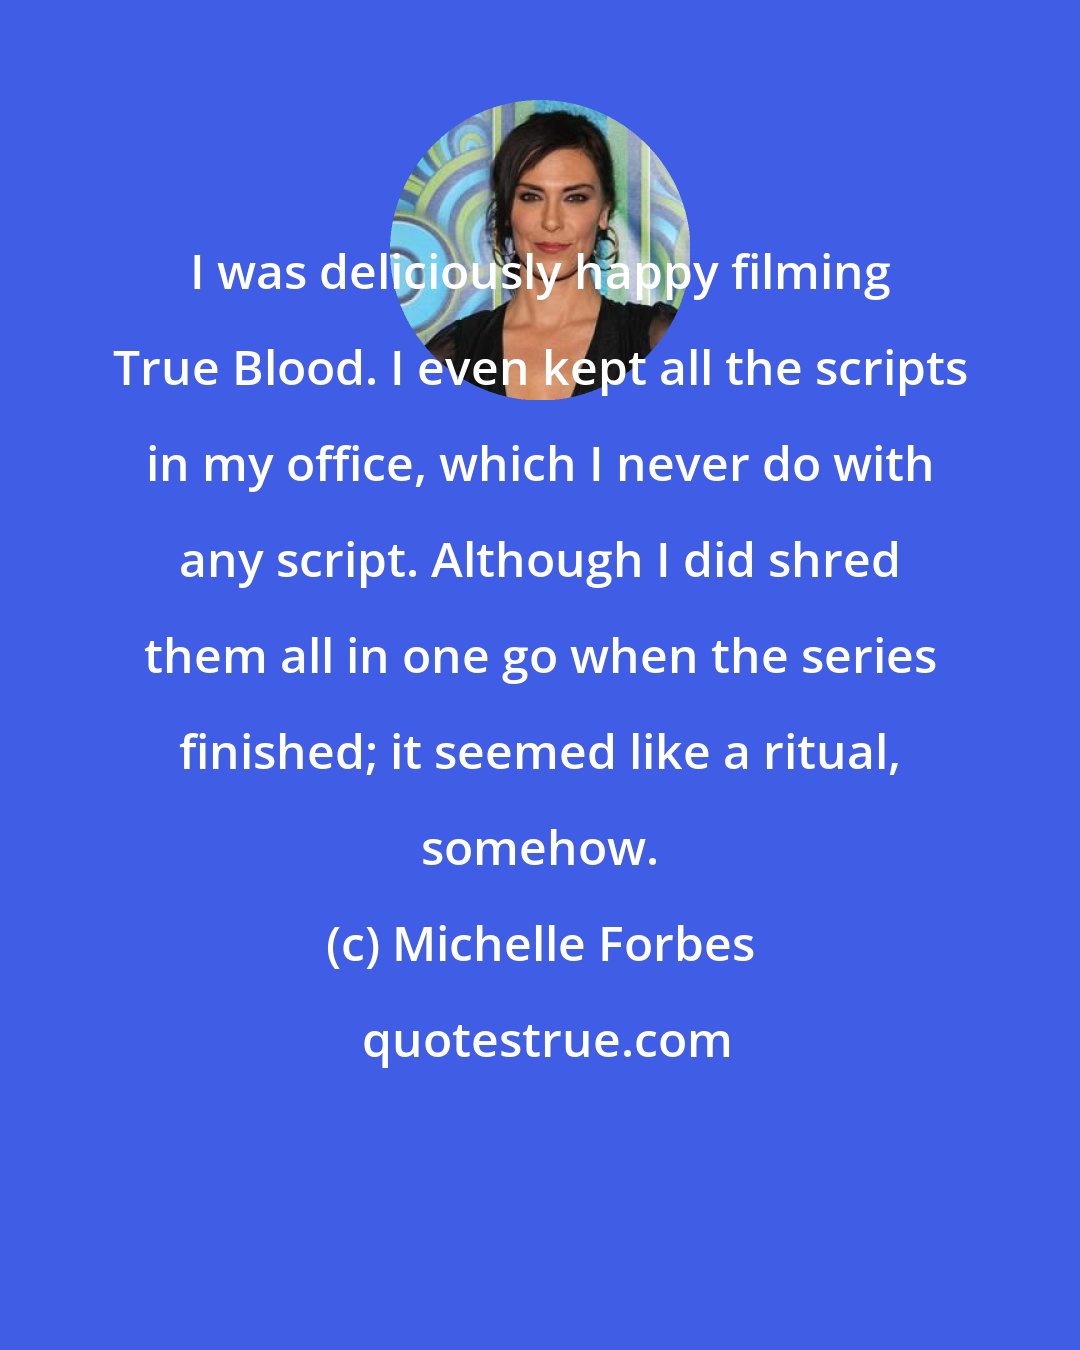 Michelle Forbes: I was deliciously happy filming True Blood. I even kept all the scripts in my office, which I never do with any script. Although I did shred them all in one go when the series finished; it seemed like a ritual, somehow.